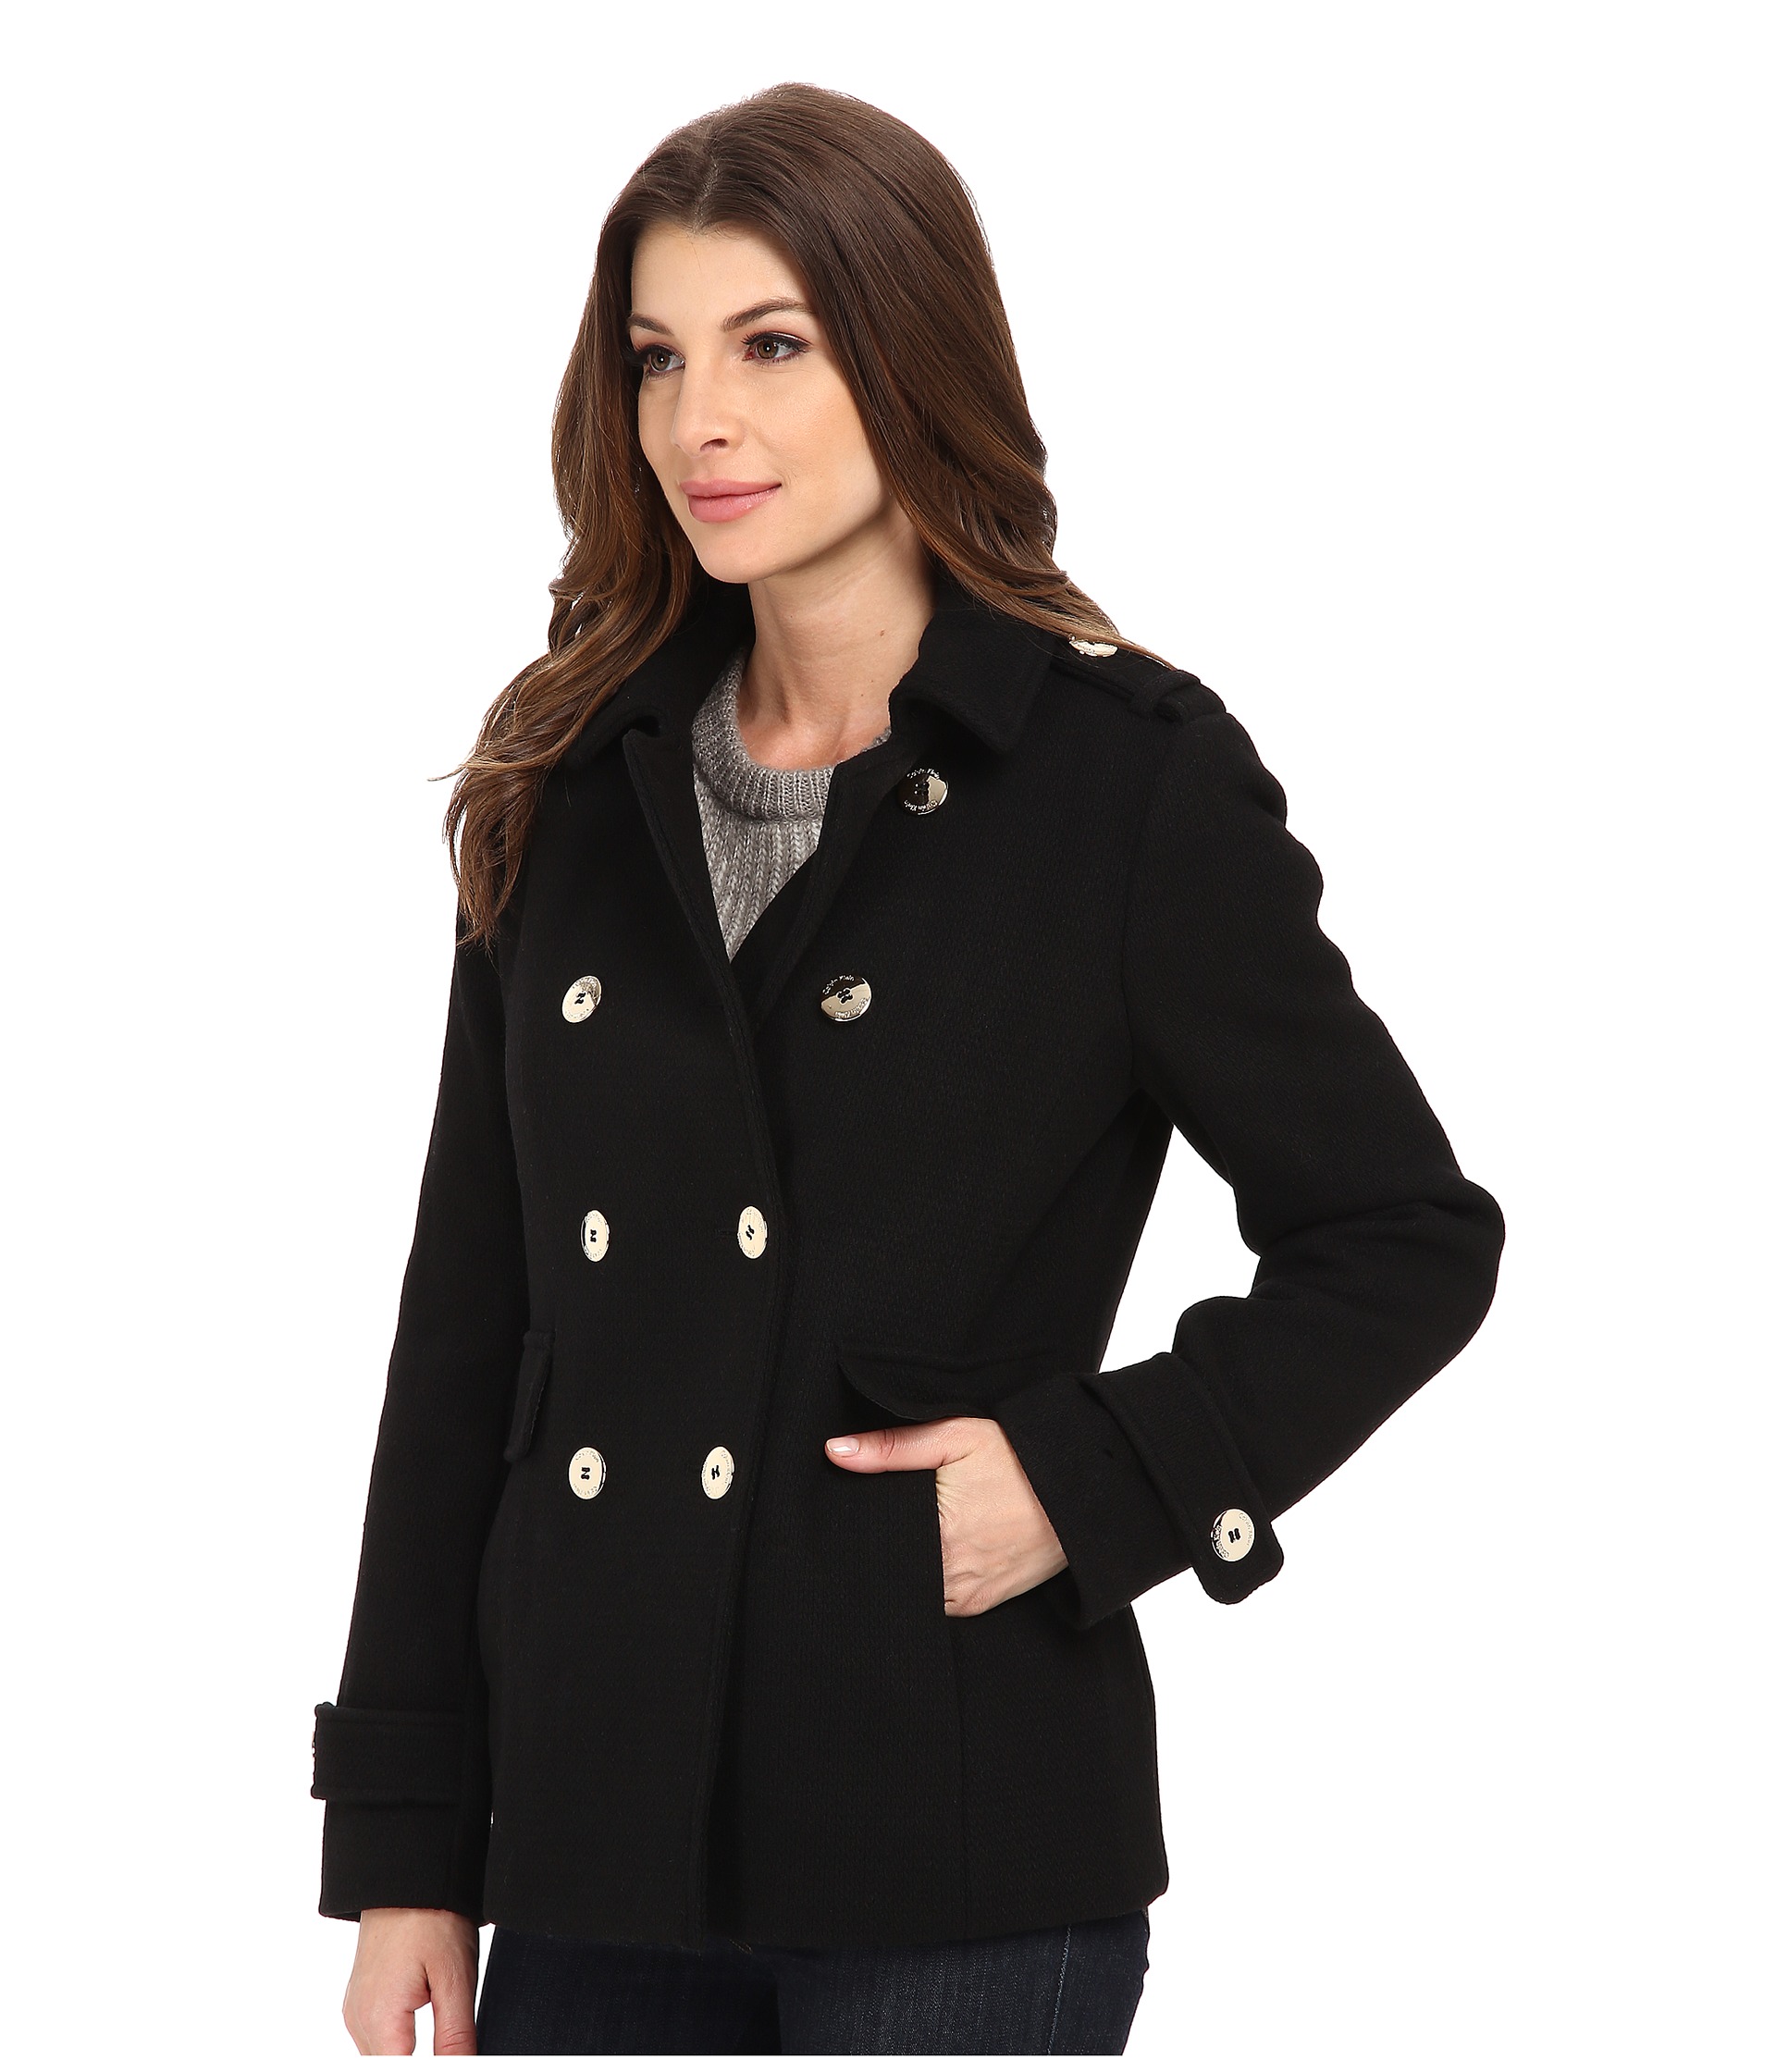 Calvin Klein Double Breasted Wool Coat at Zappos.com